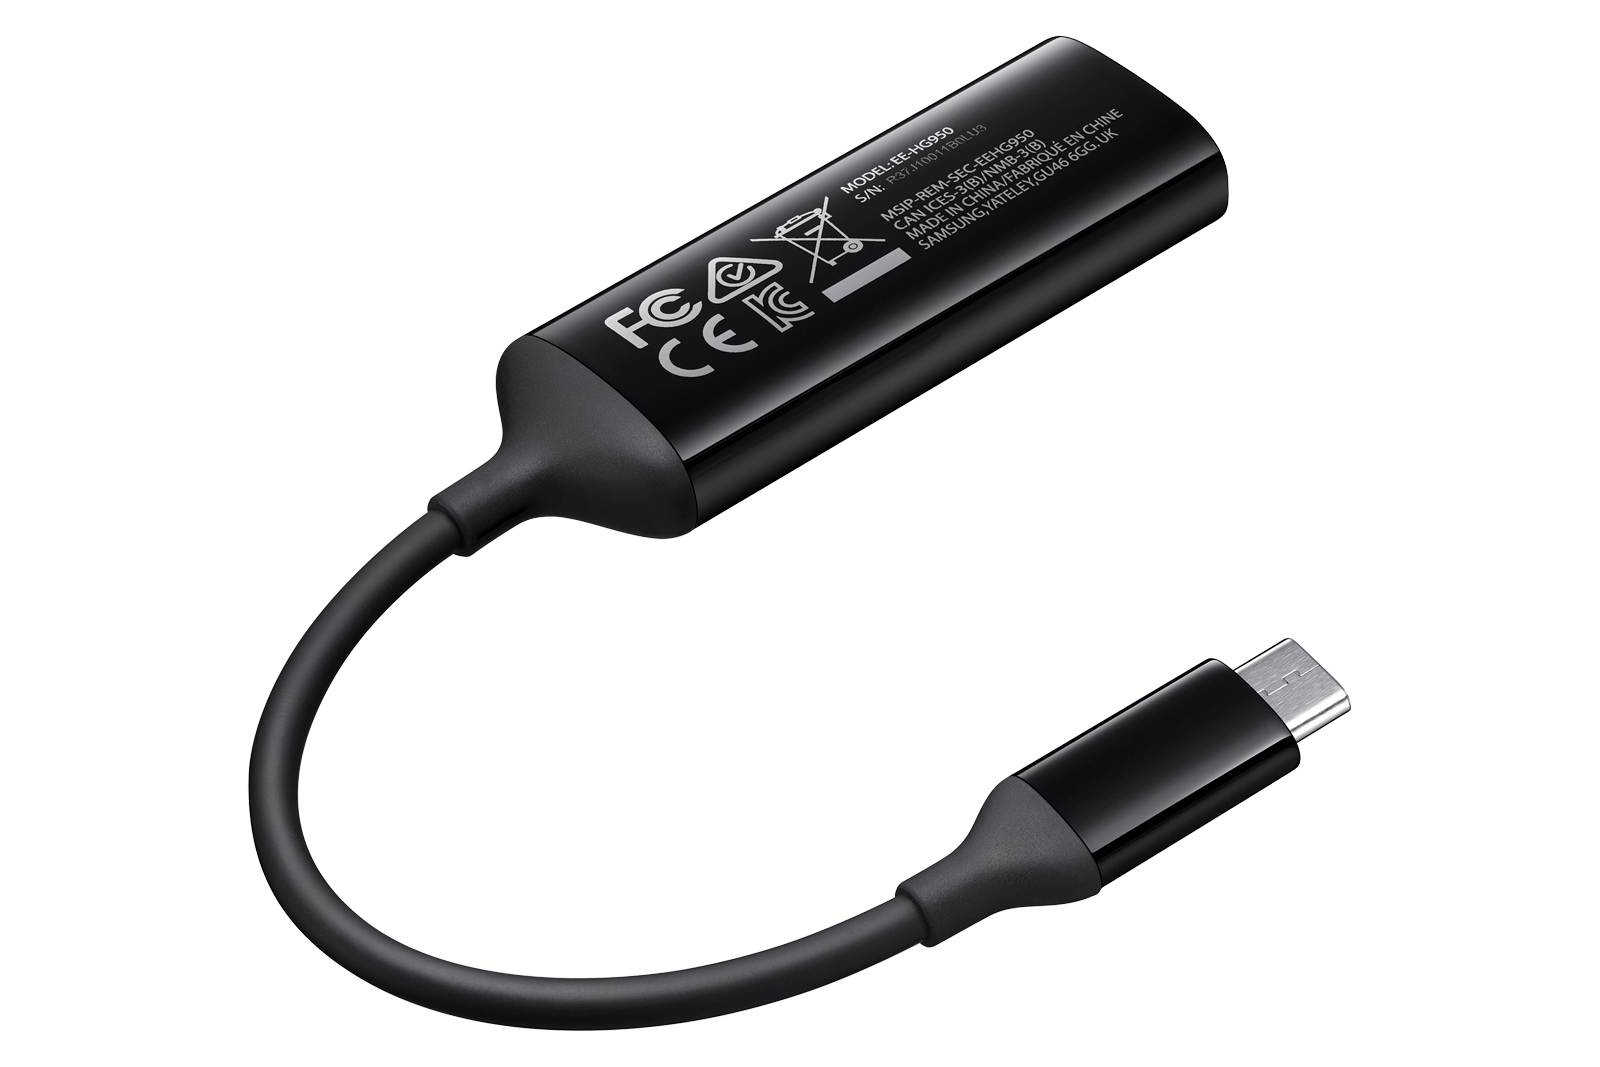 USB-C to HDMI Adapter, Black Mobile Accessories - EE-HG950DBEGWW